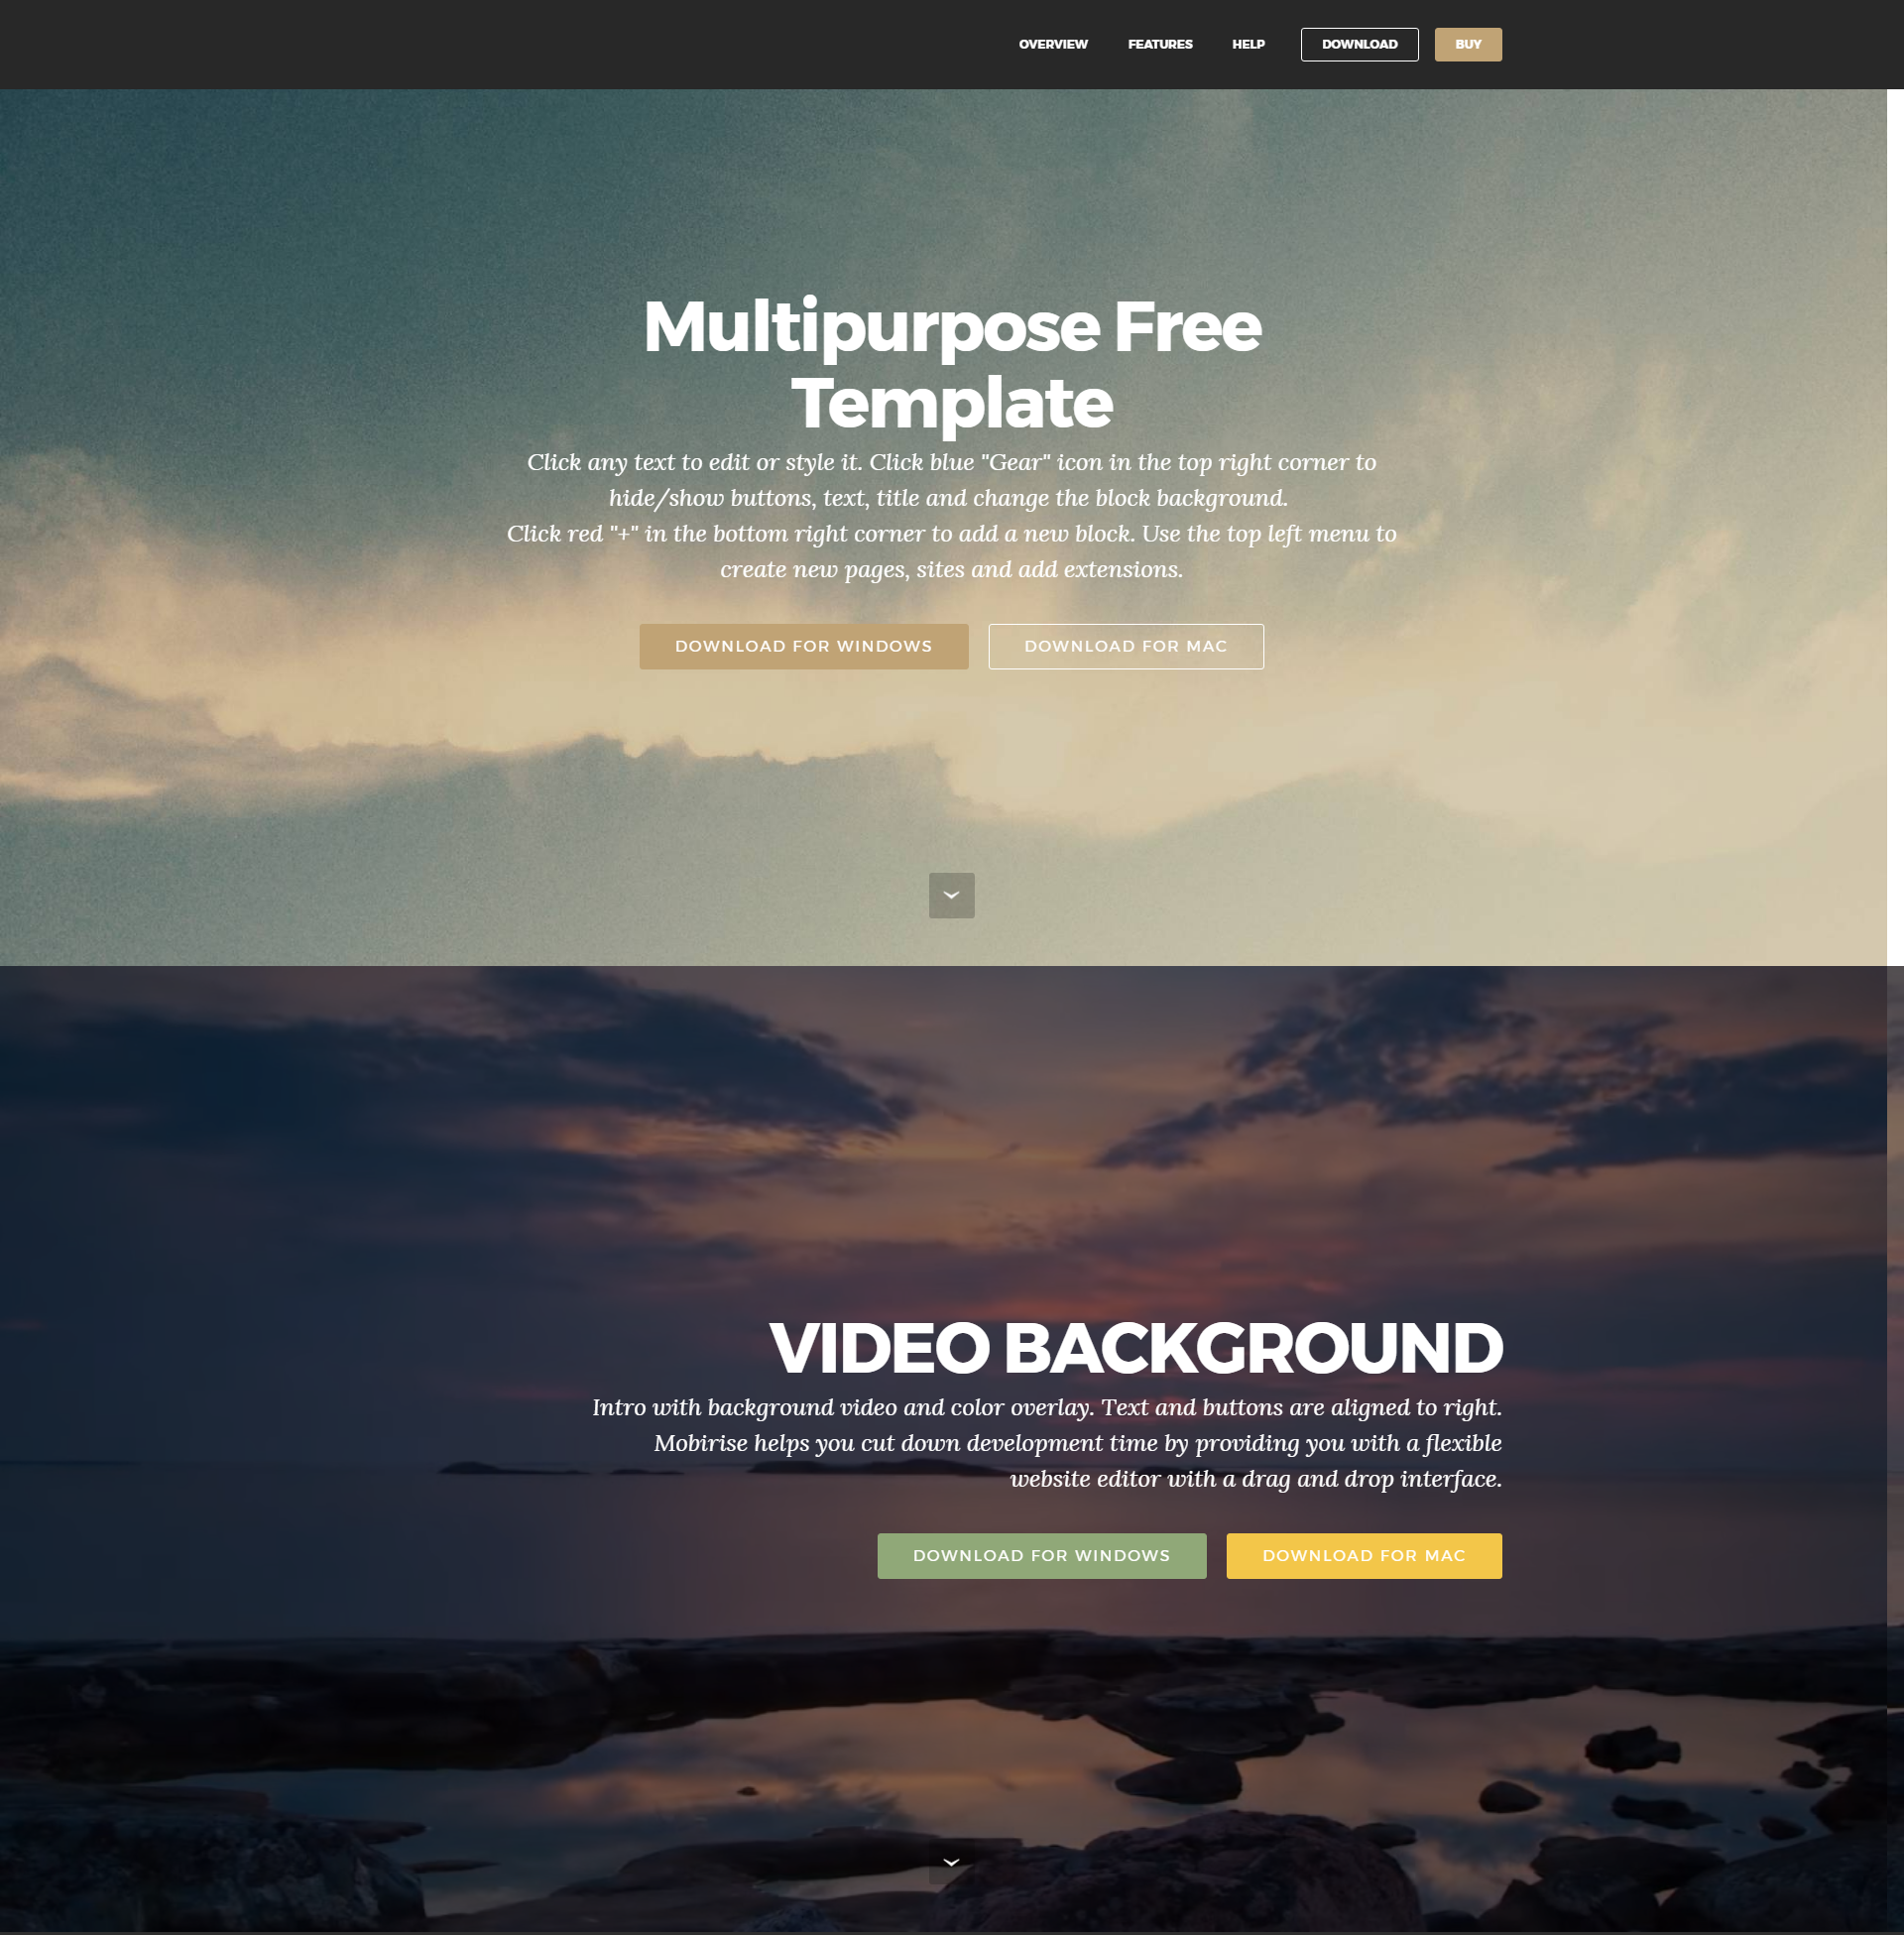 bootstrap-responsive-website-templates-free-download-for-education-best-home-design-ideas